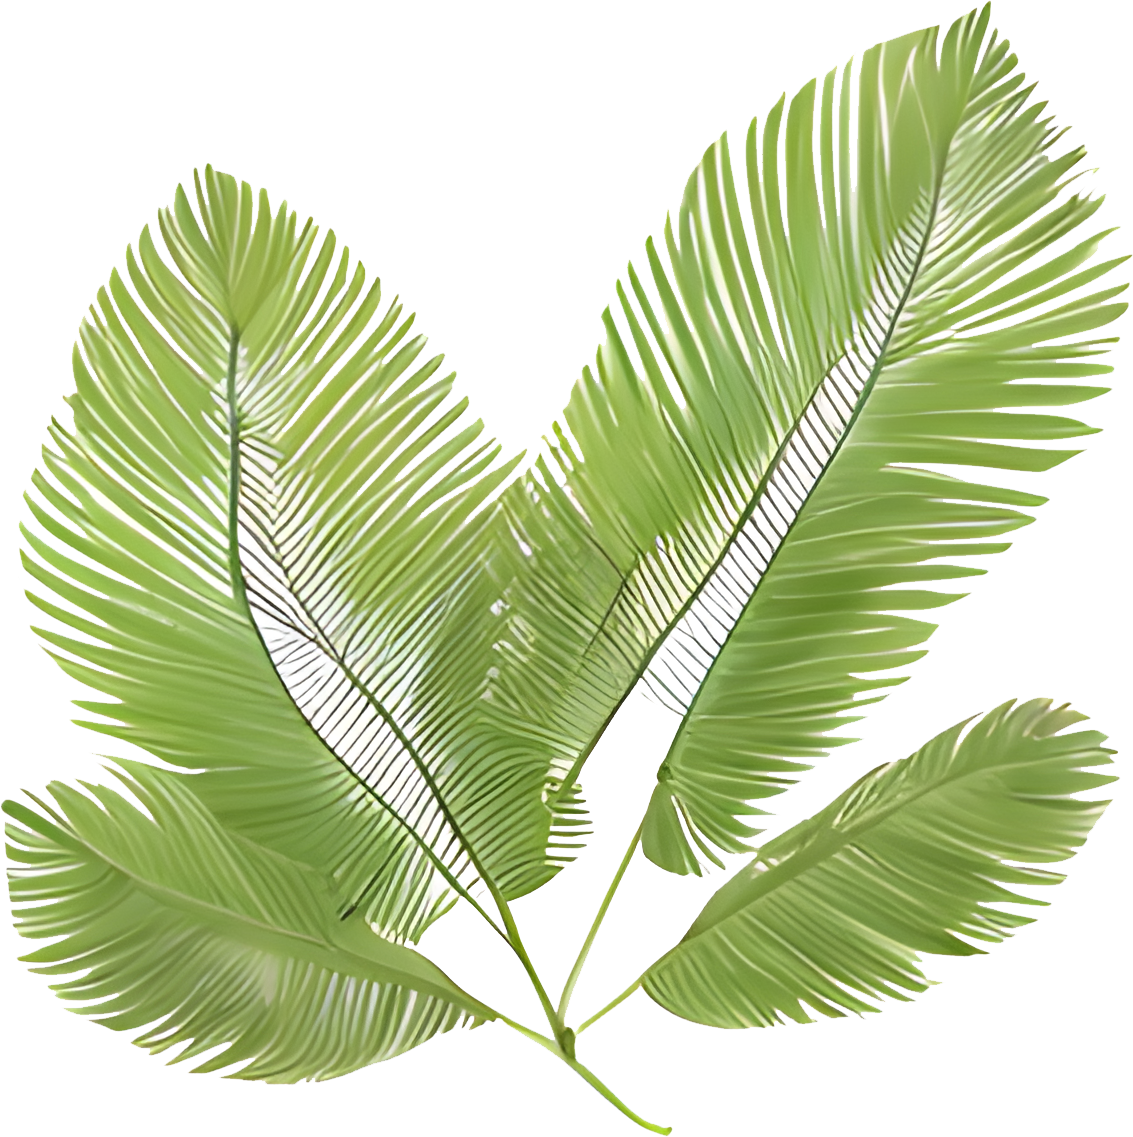 High-Res Leaf PNG Green Foliage Image, Tropical different type exotic leaves set. Jungle plants. Calathea, Monstera and different style of palm leaves